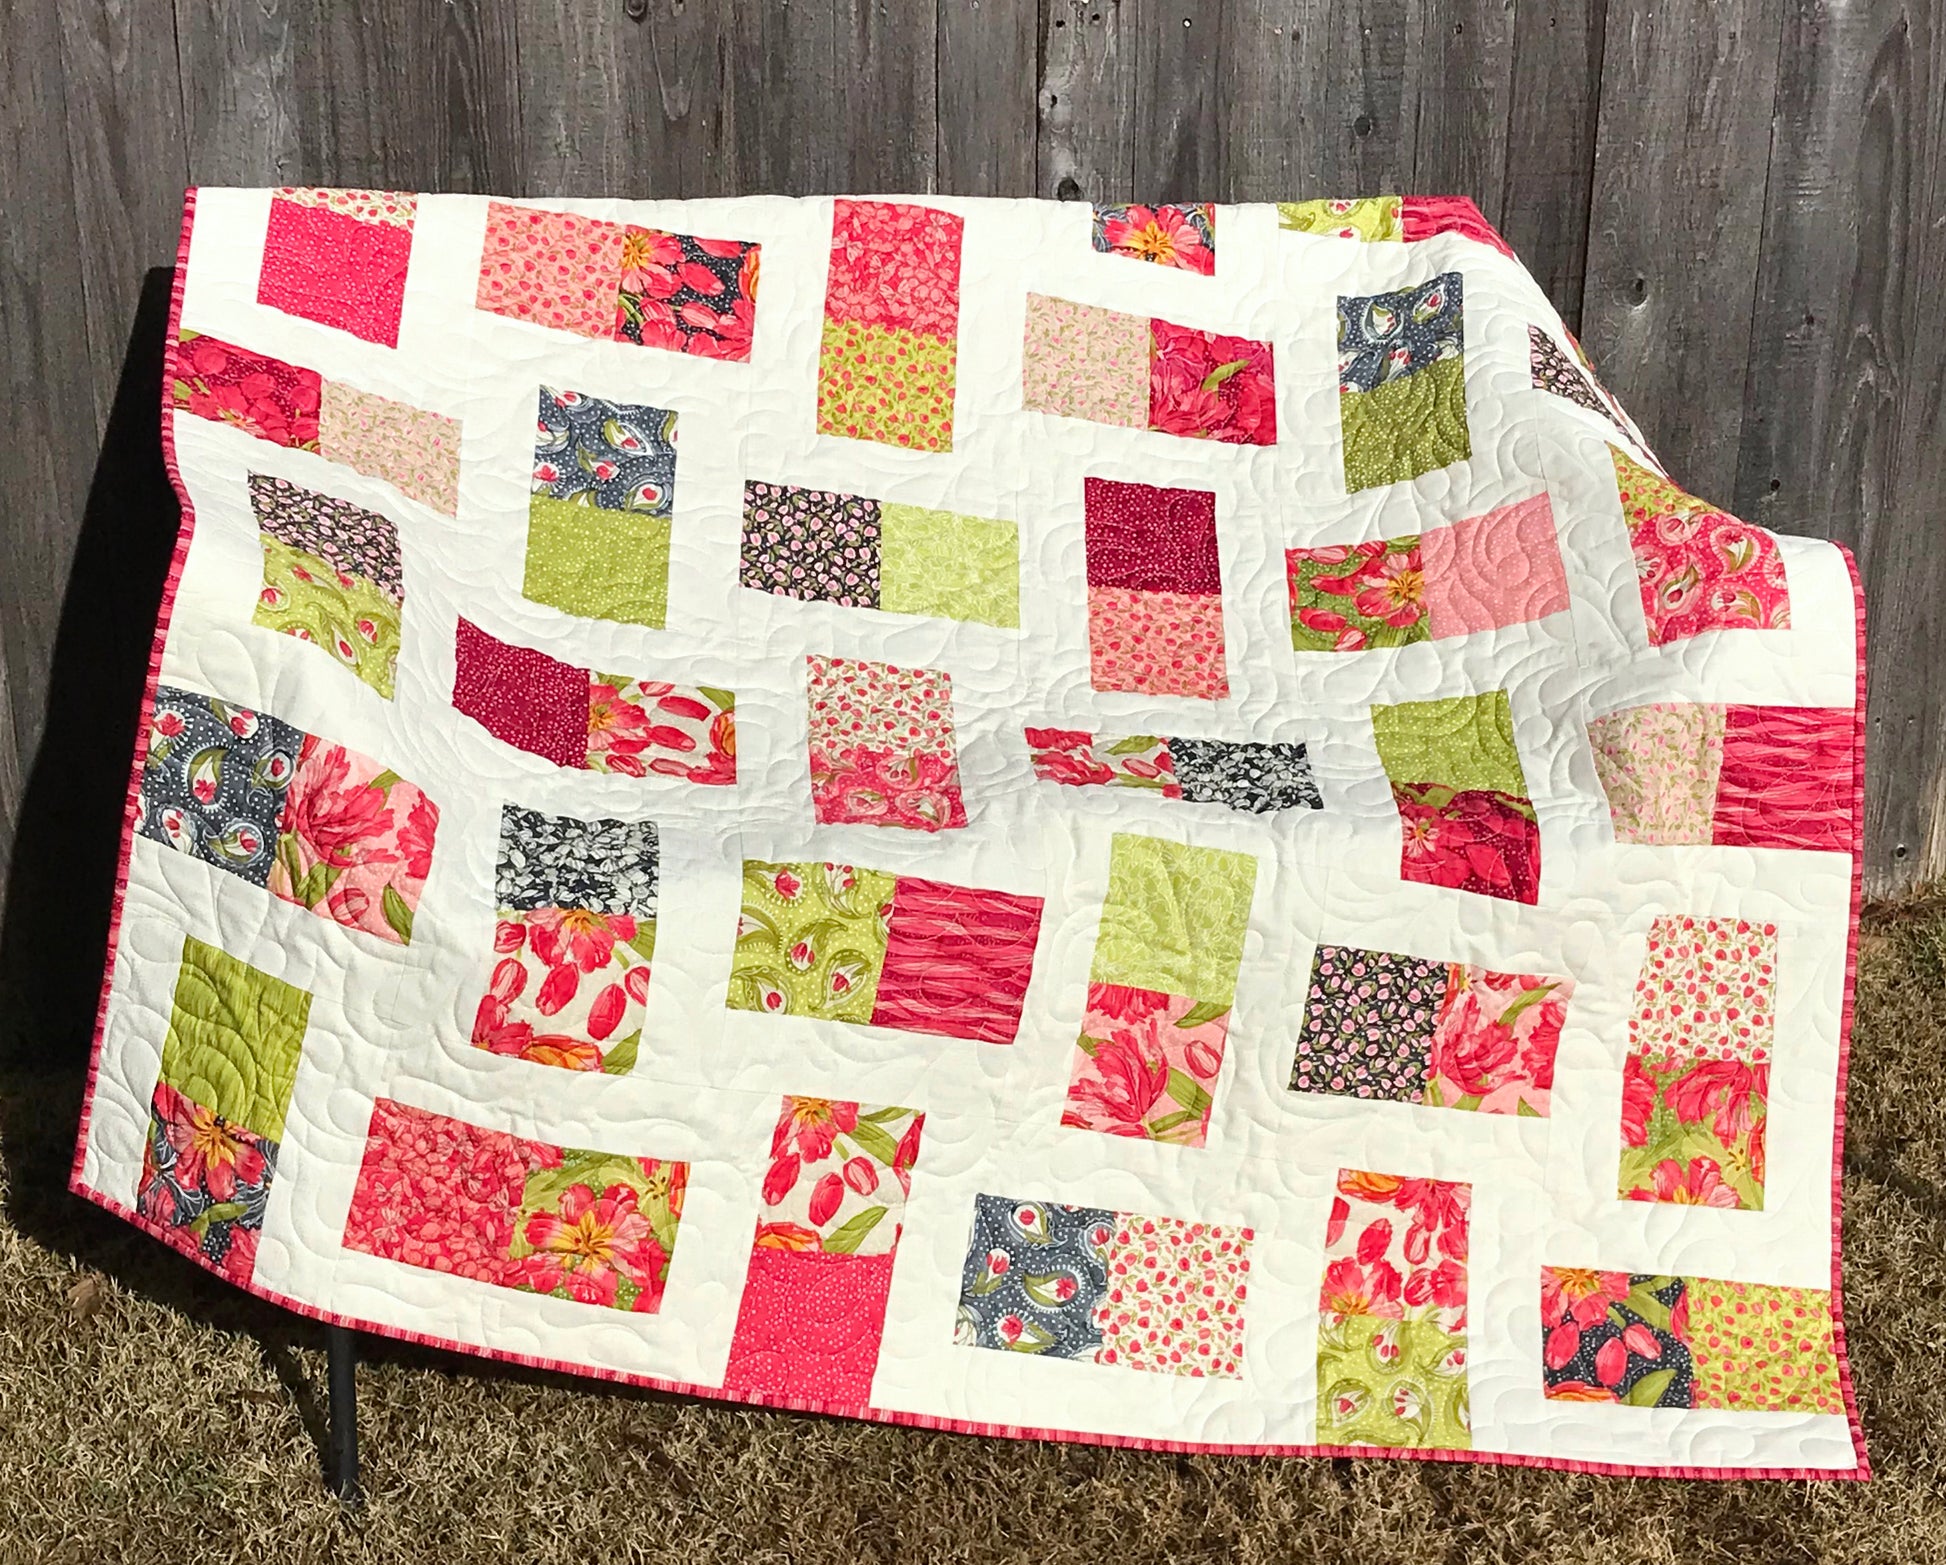 Hidden Charms Quilt Pattern for Charm Squares - Digital Quilt Pattern - Handmade Quilts, Digital Patterns, and Home Décor items online - Cuddle Cat Quiltworks